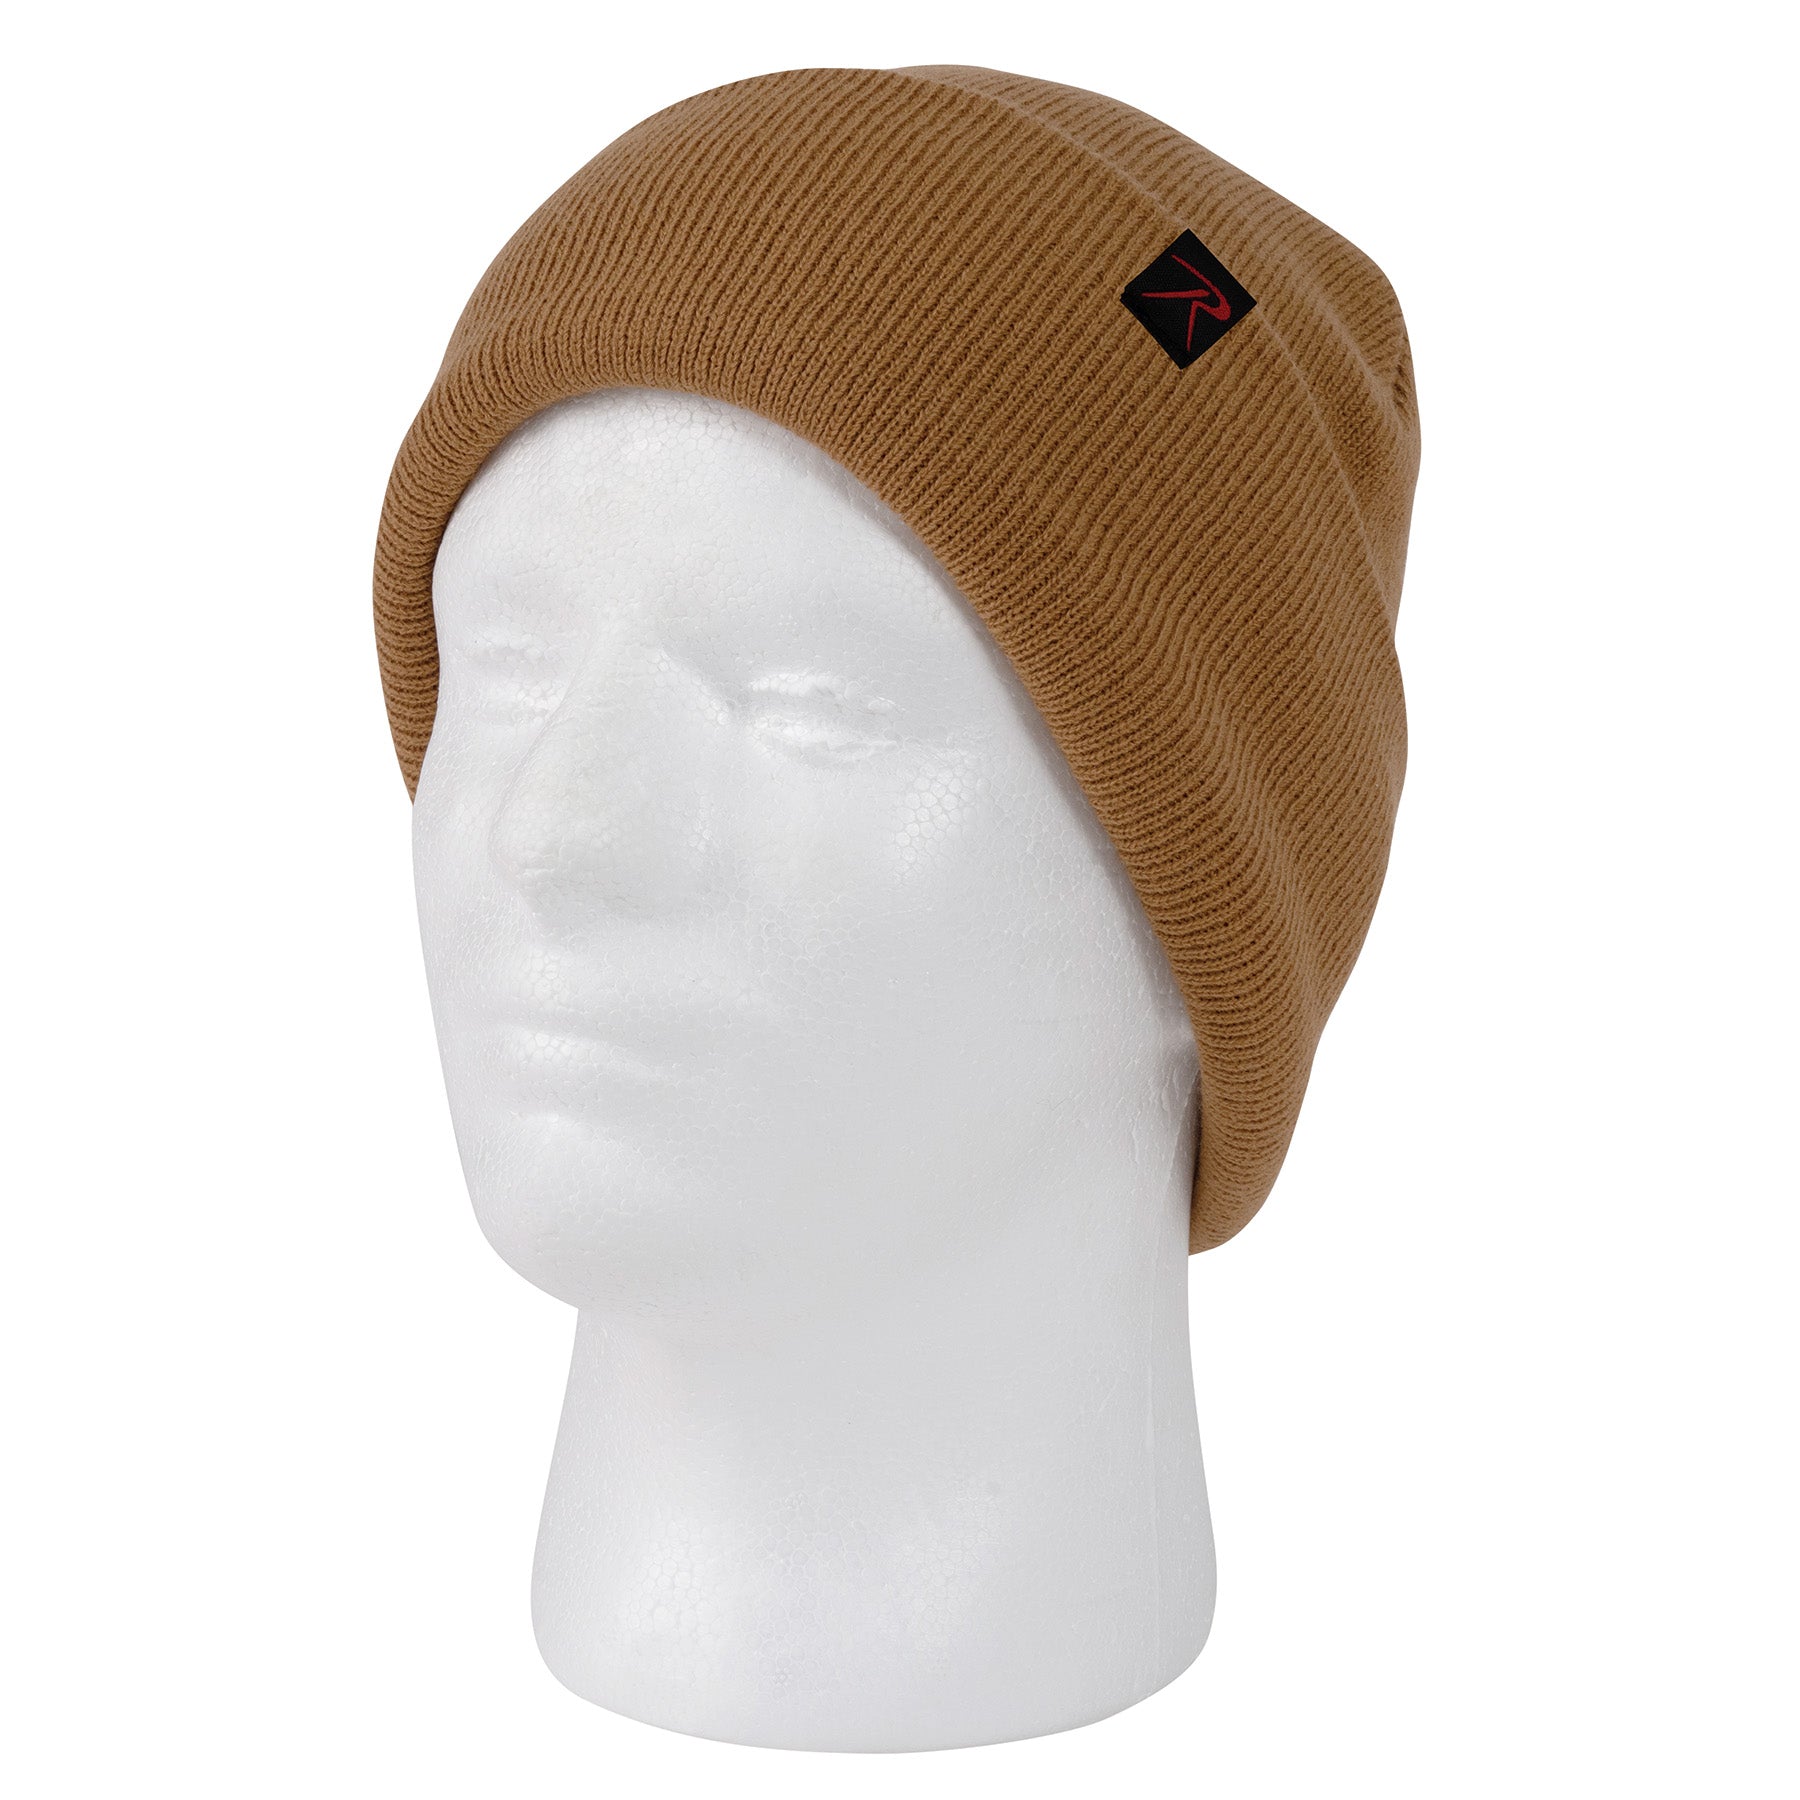 Rothco Deluxe Fine Knit Watch Cap - Various Colors